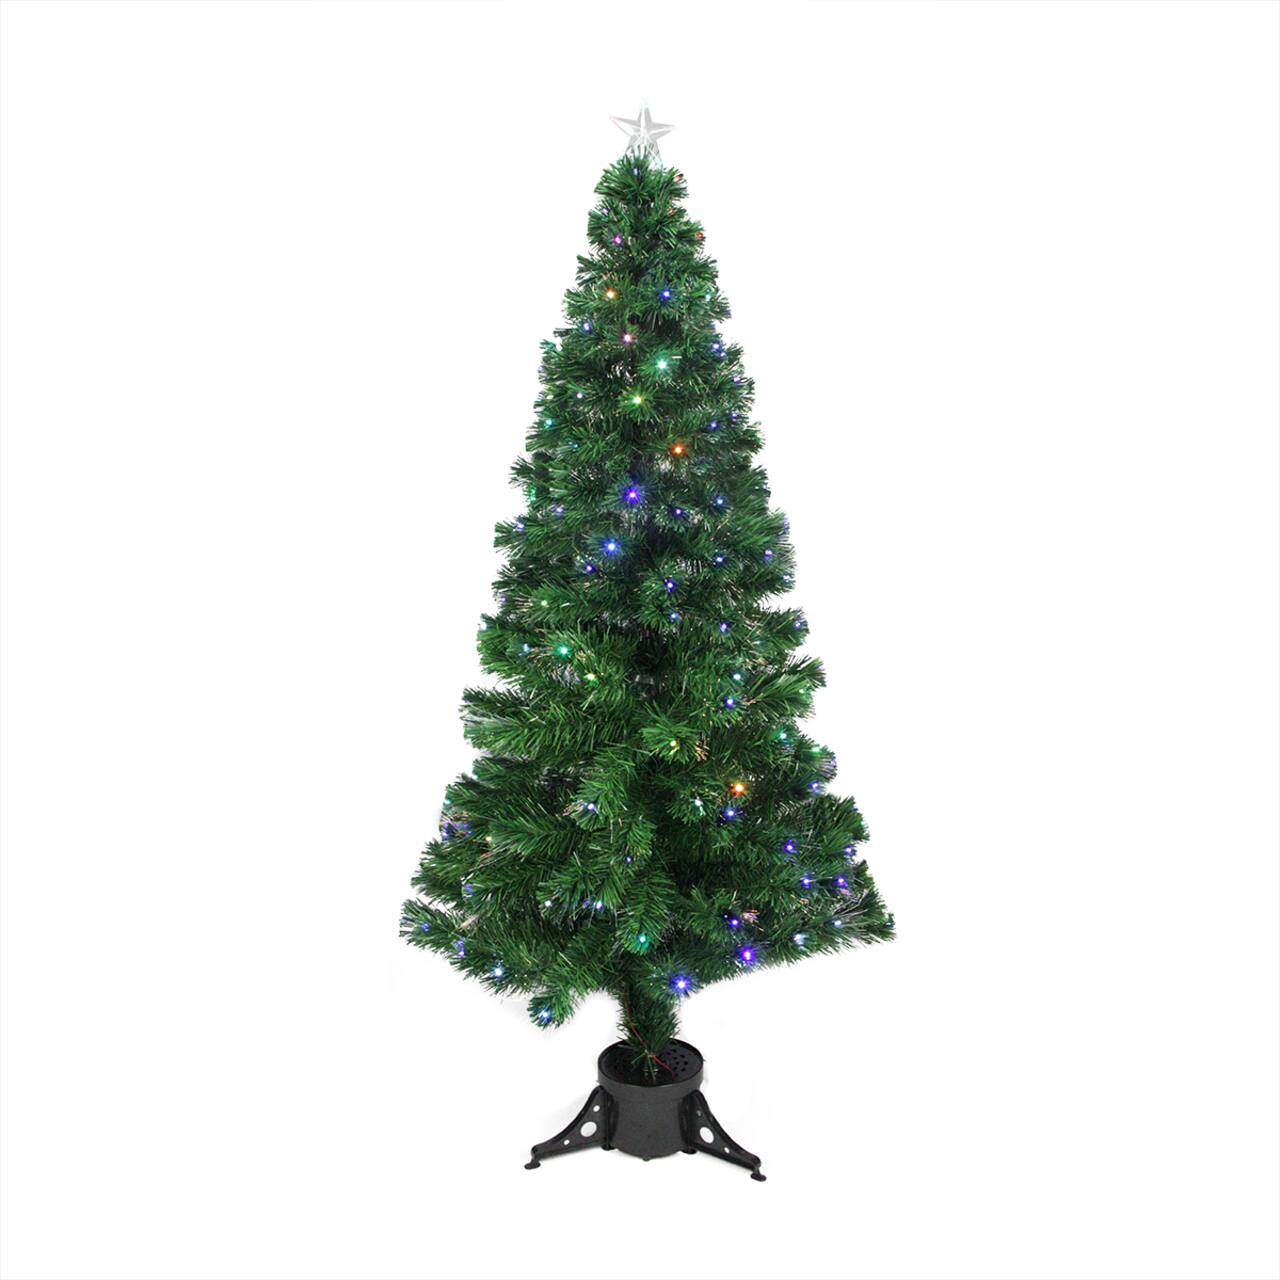 6ft. Pre-Lit Fiber Optic Artificial Christmas Tree with Star Tree Topper and Pot, LED Color-Changing Lights